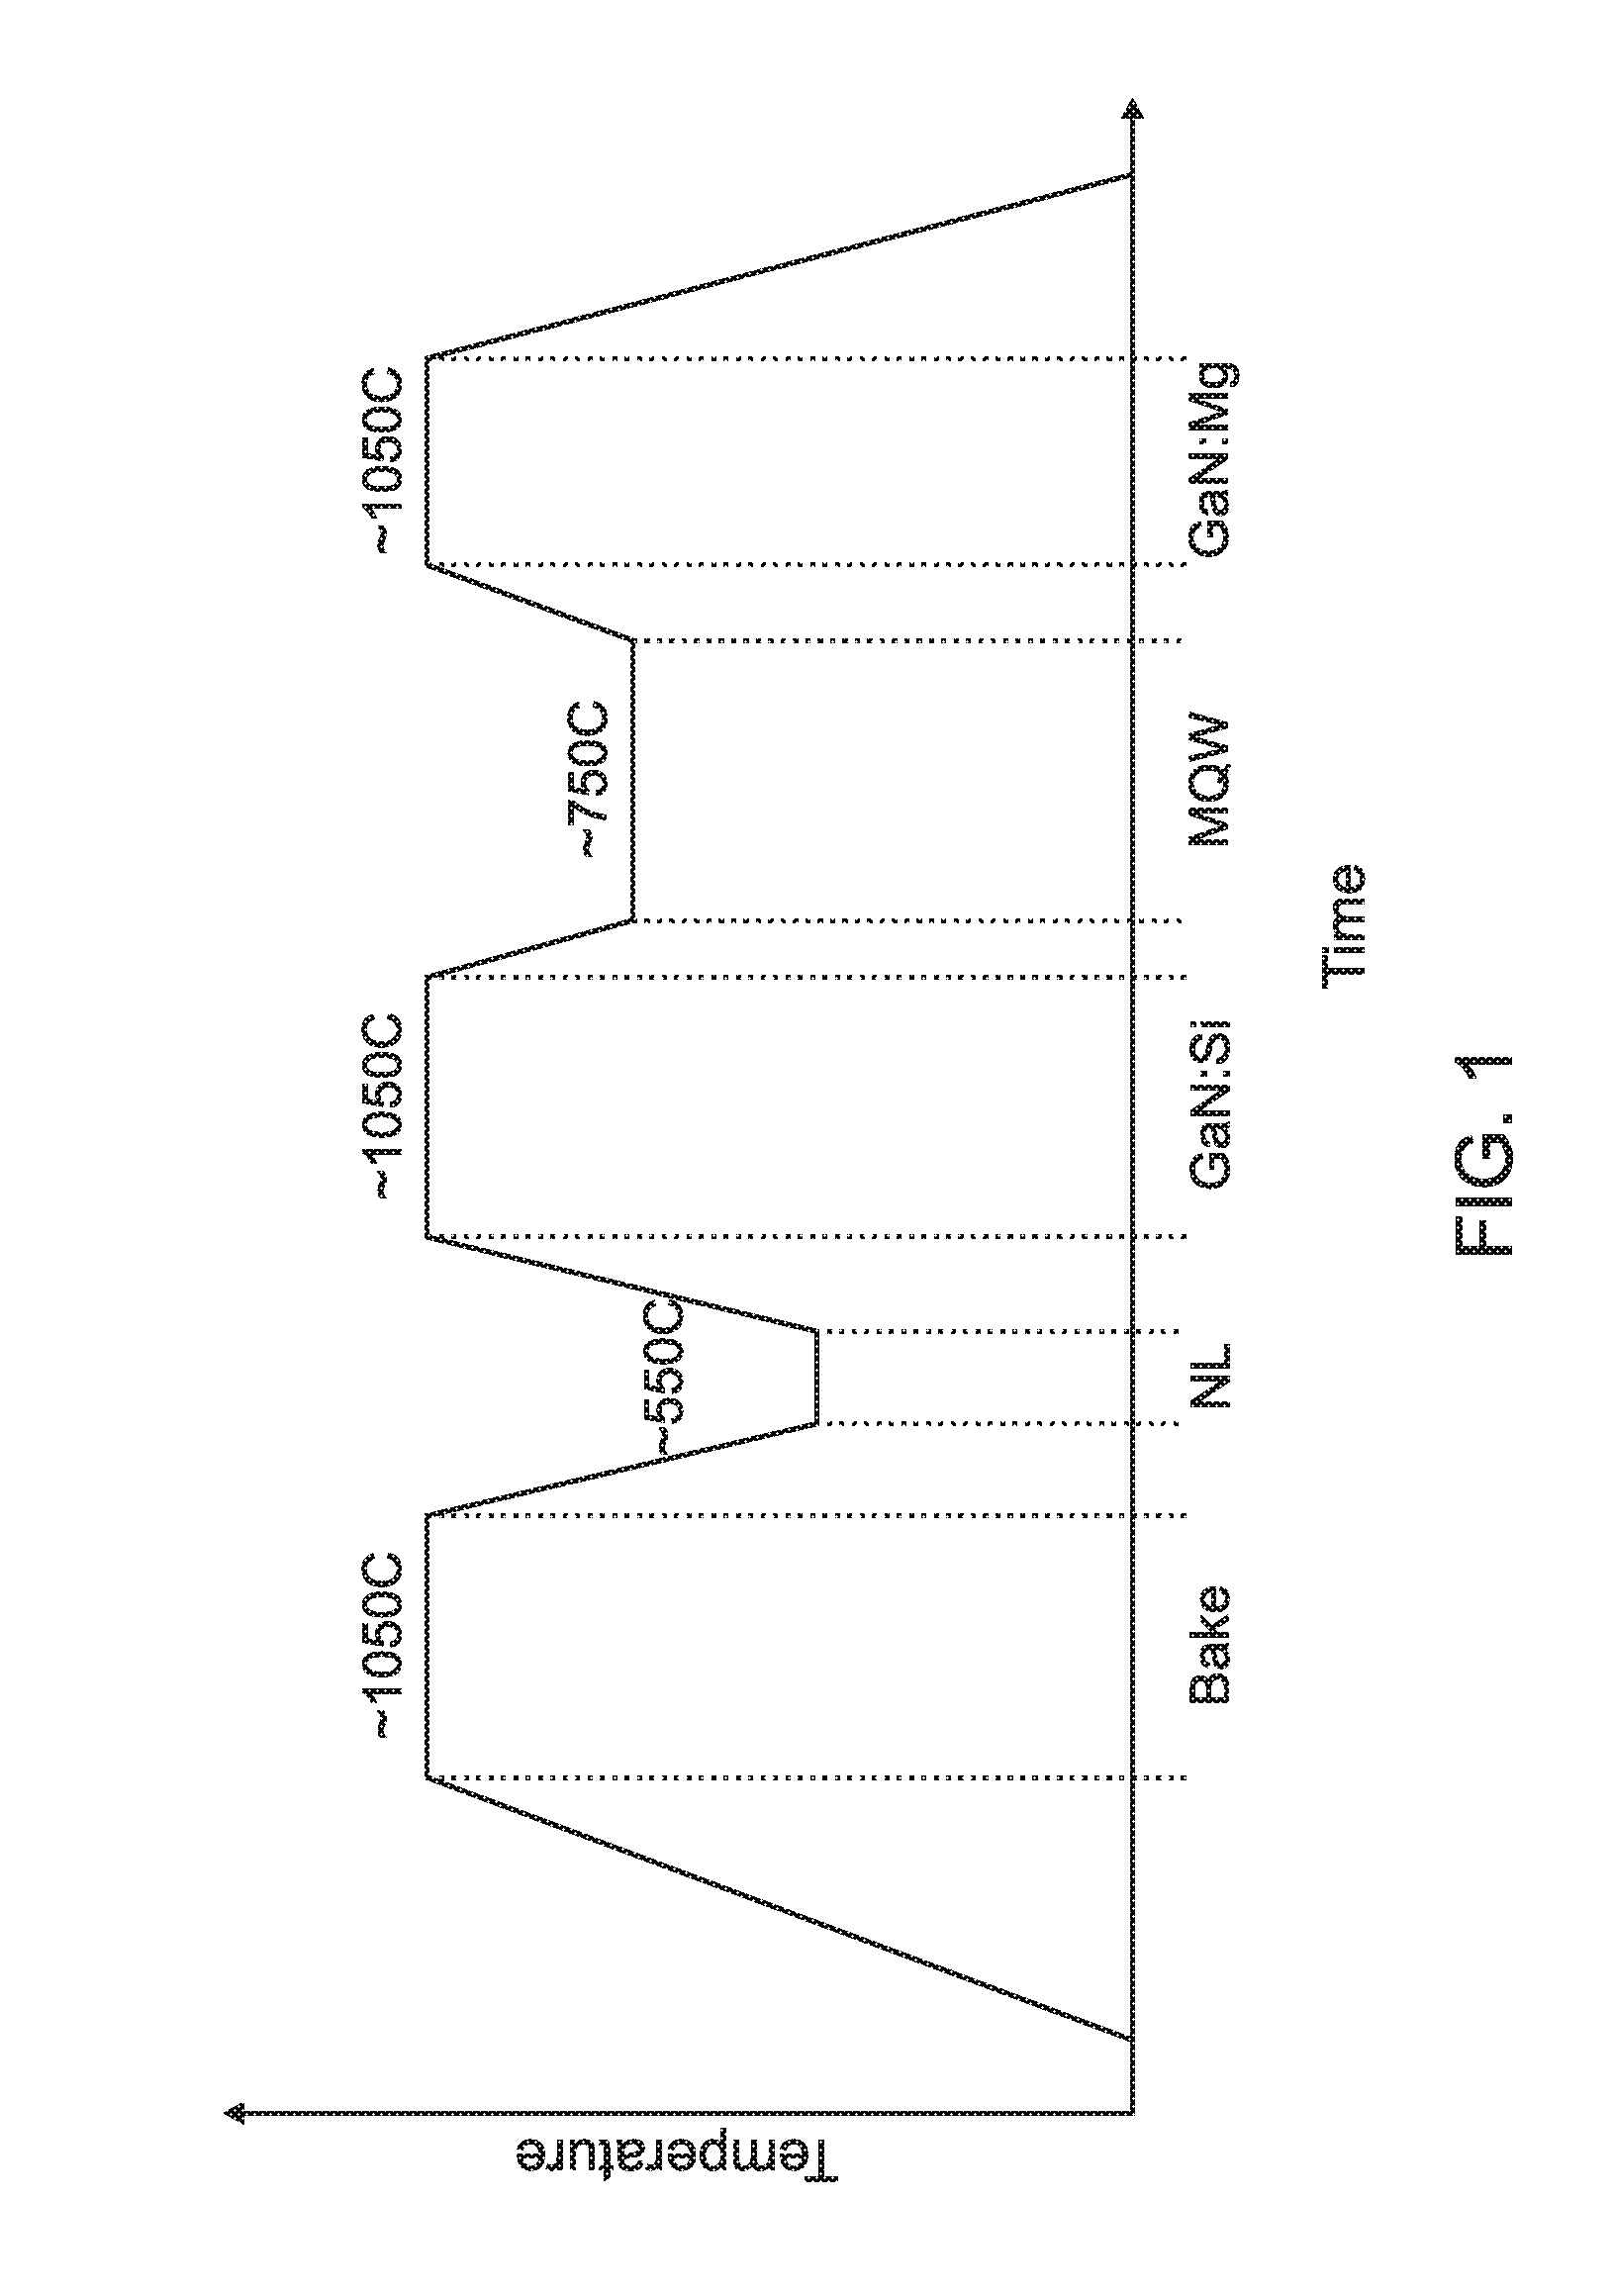 Method for deposition of magnesium doped (Al, In, Ga, B)N layers